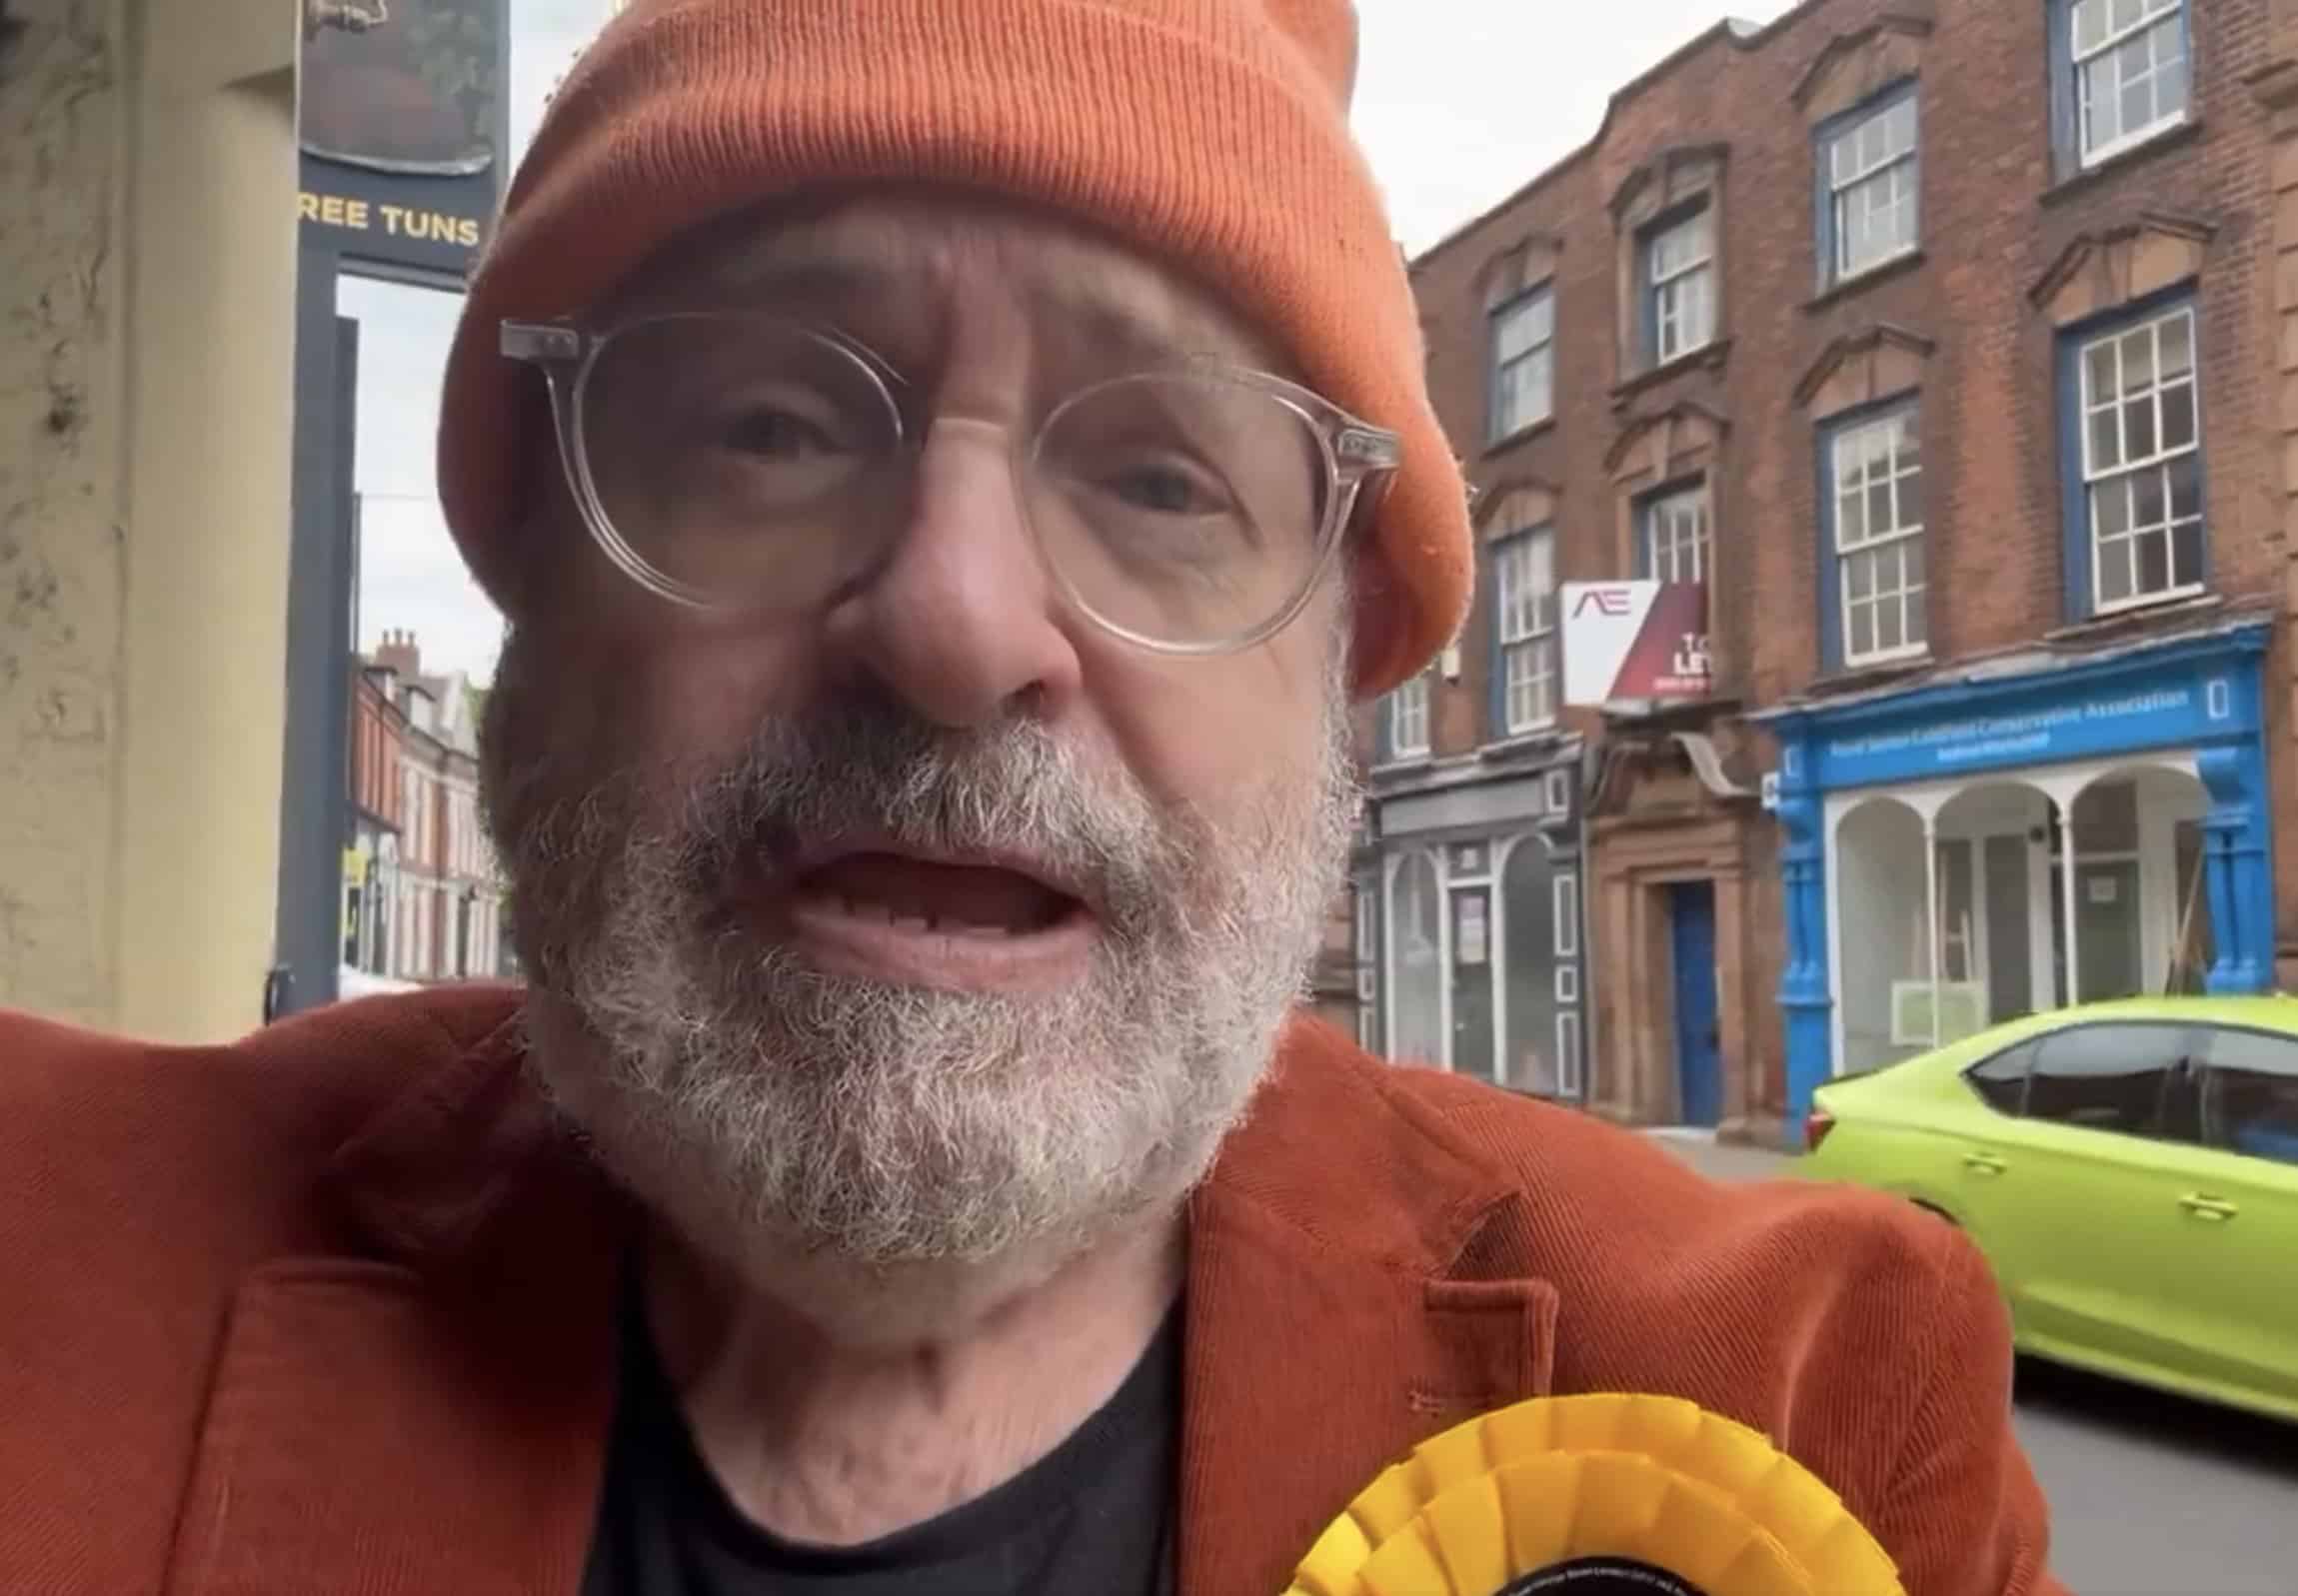 John Sweeney to run for Lib Dems in Sutton Coldfield